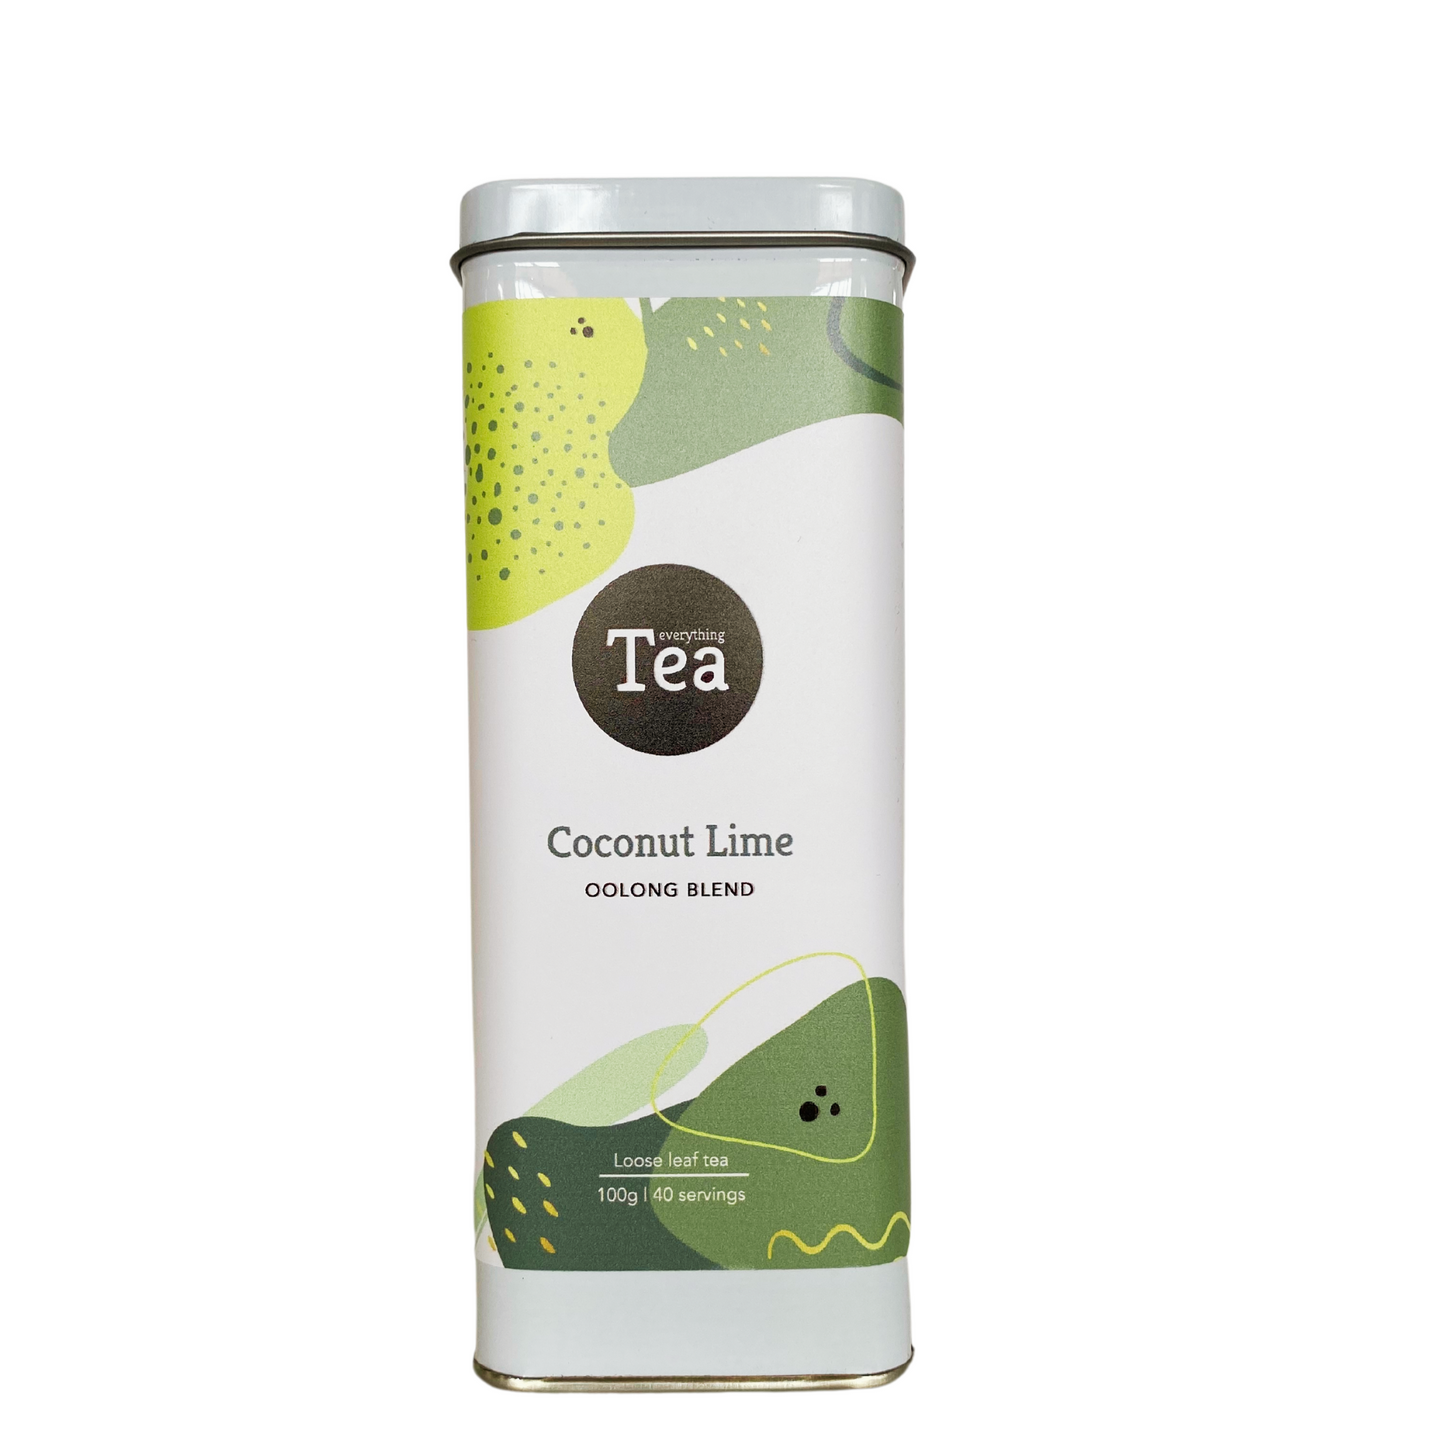 Coconut Lime Oolong